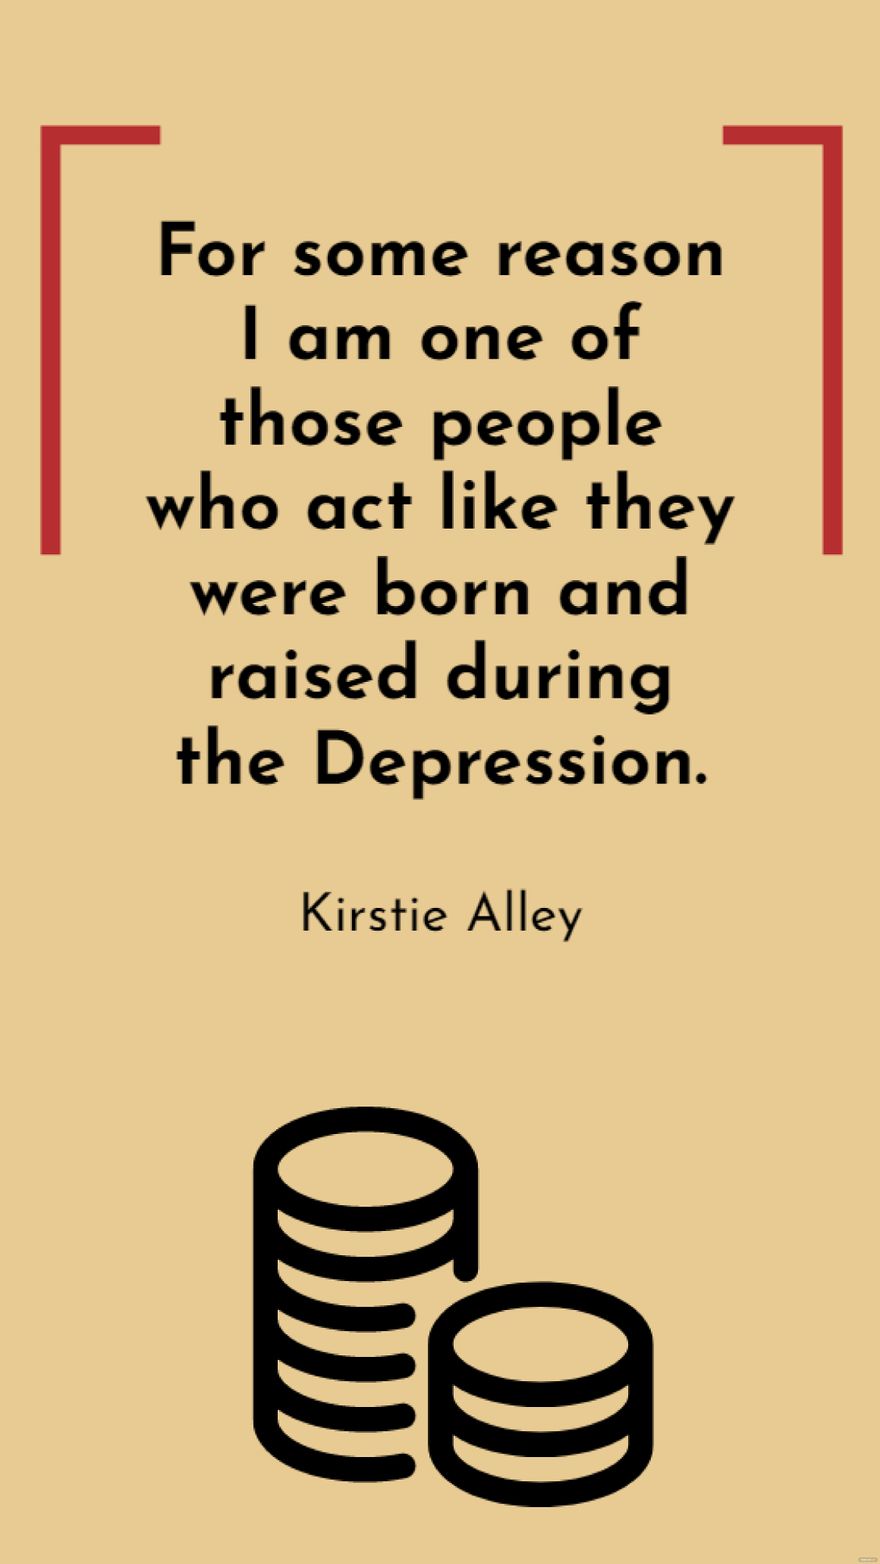 Kirstie Alley - For some reason I am one of those people who act like they were born and raised during the Depression.